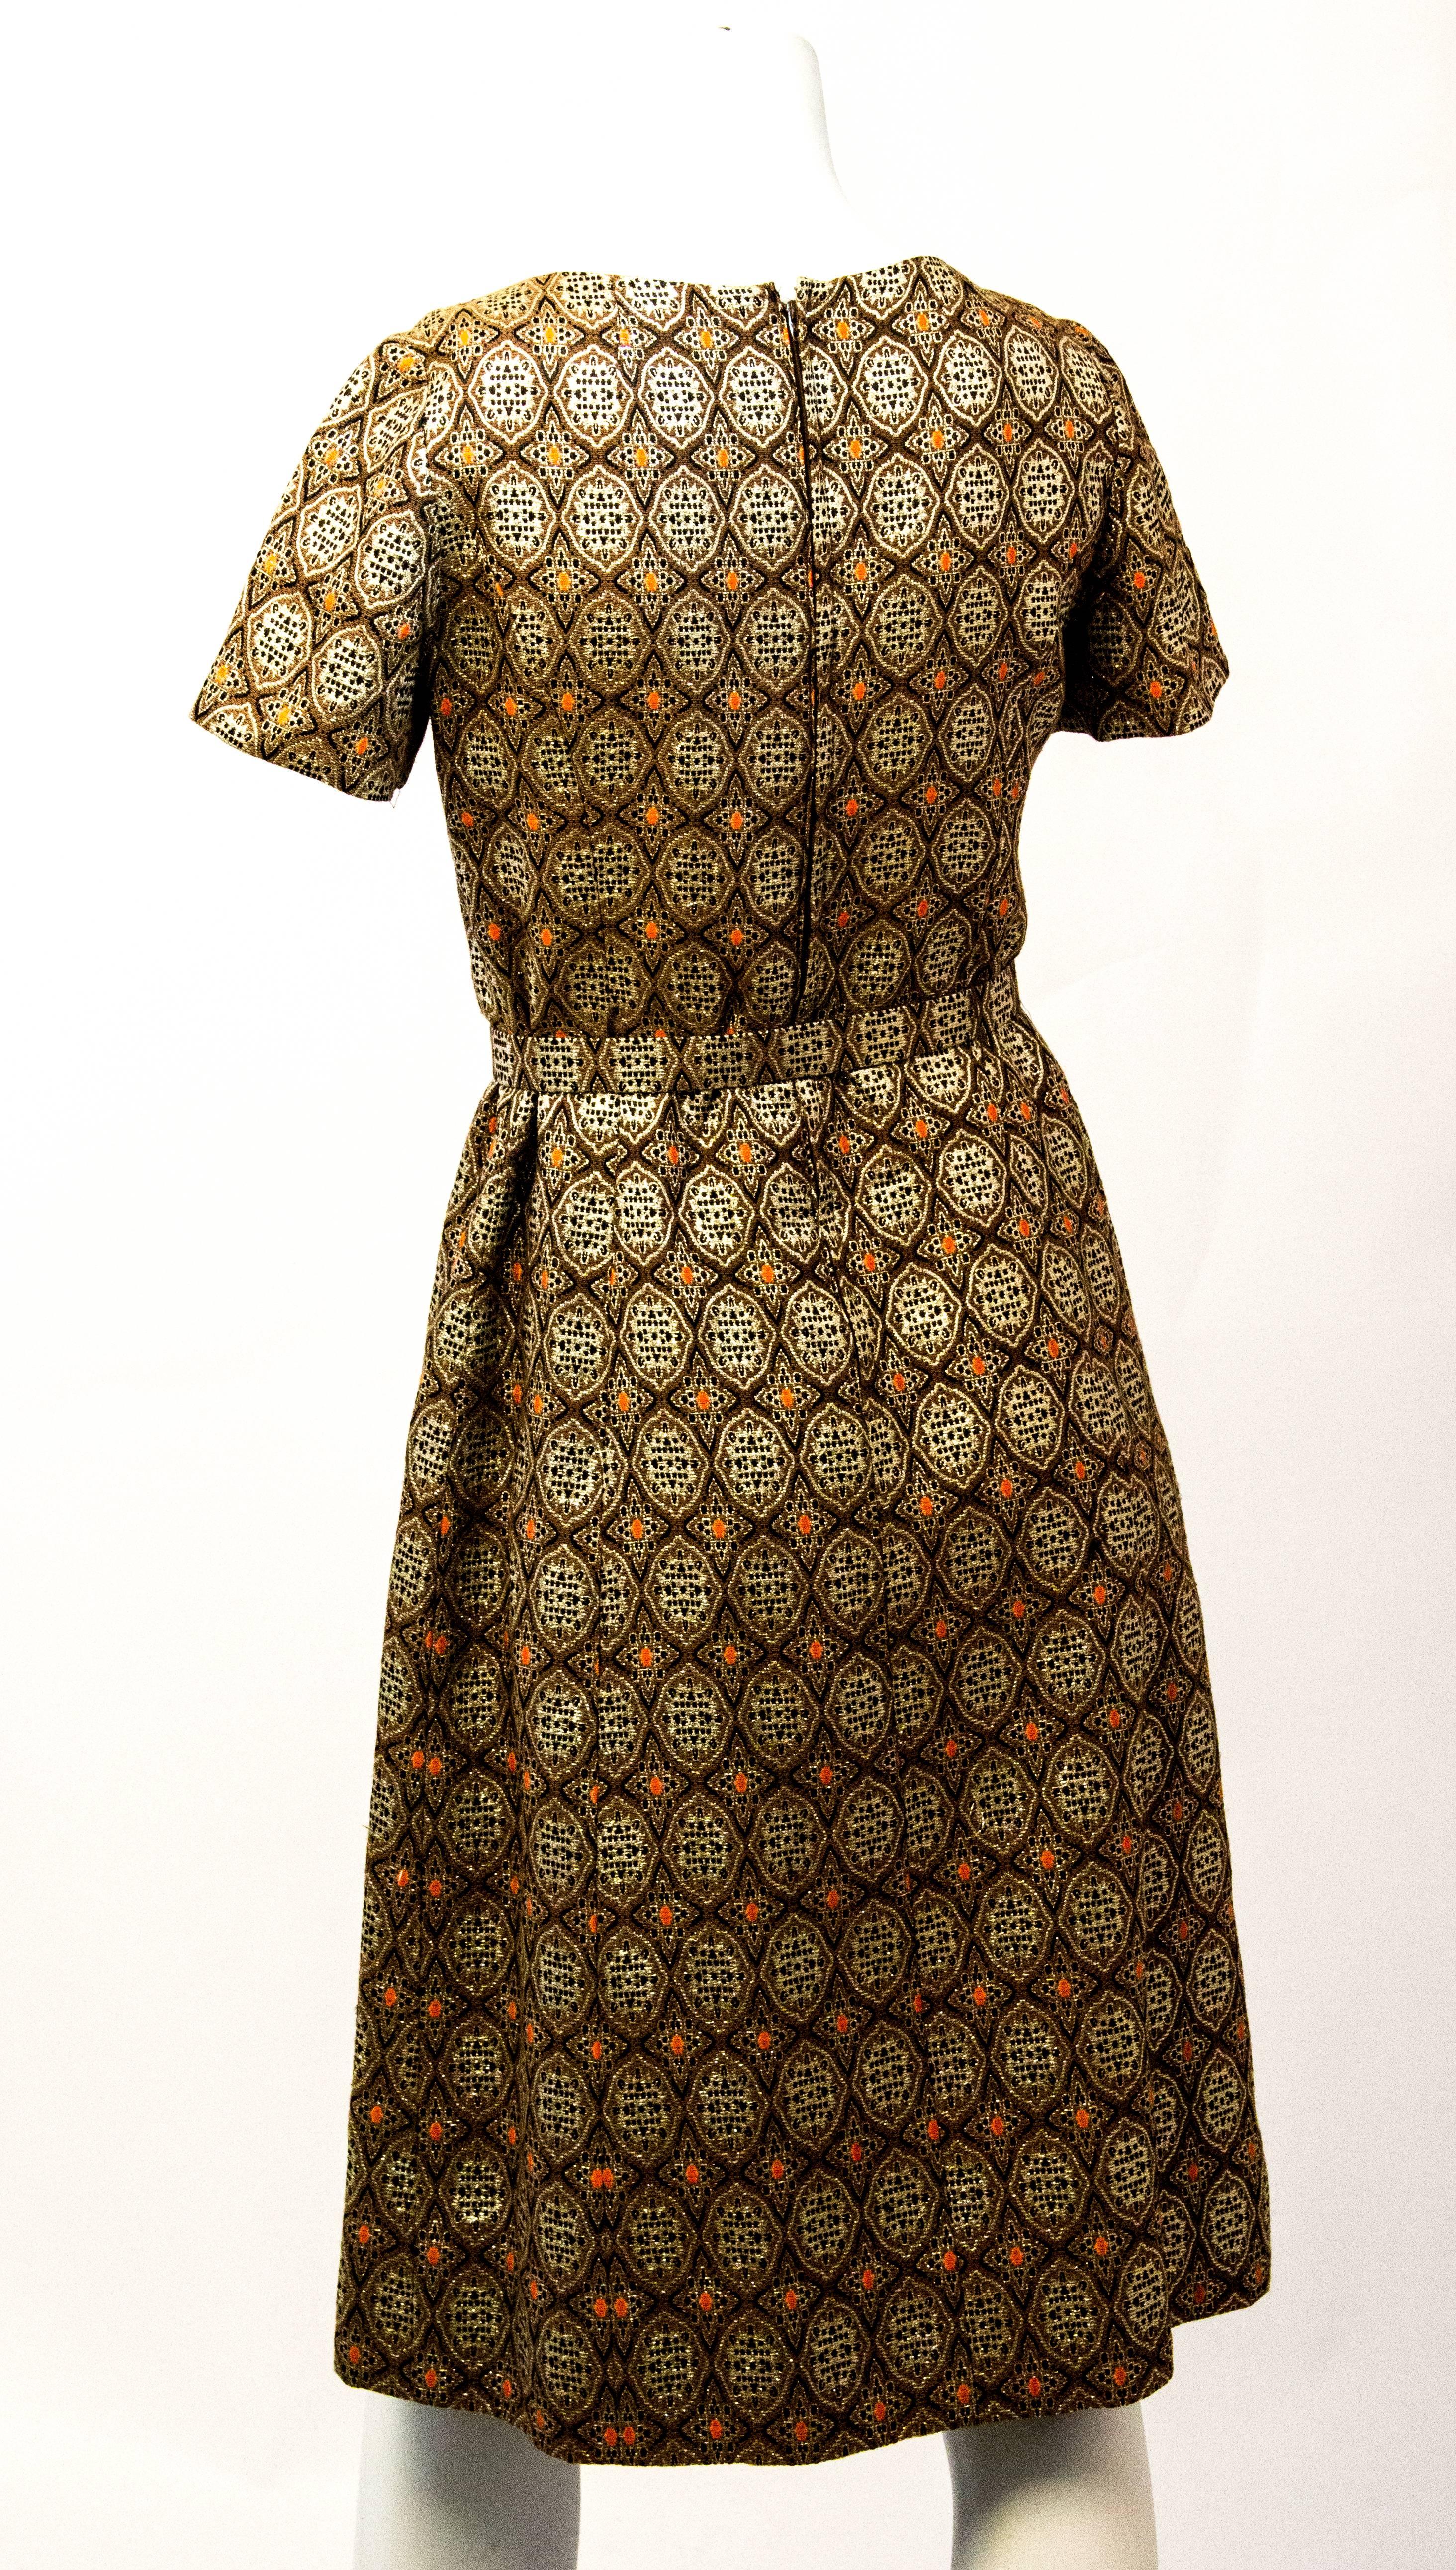 60s gold metallic brocade dress with original matching belt. Fully lined. Zips up the back. 